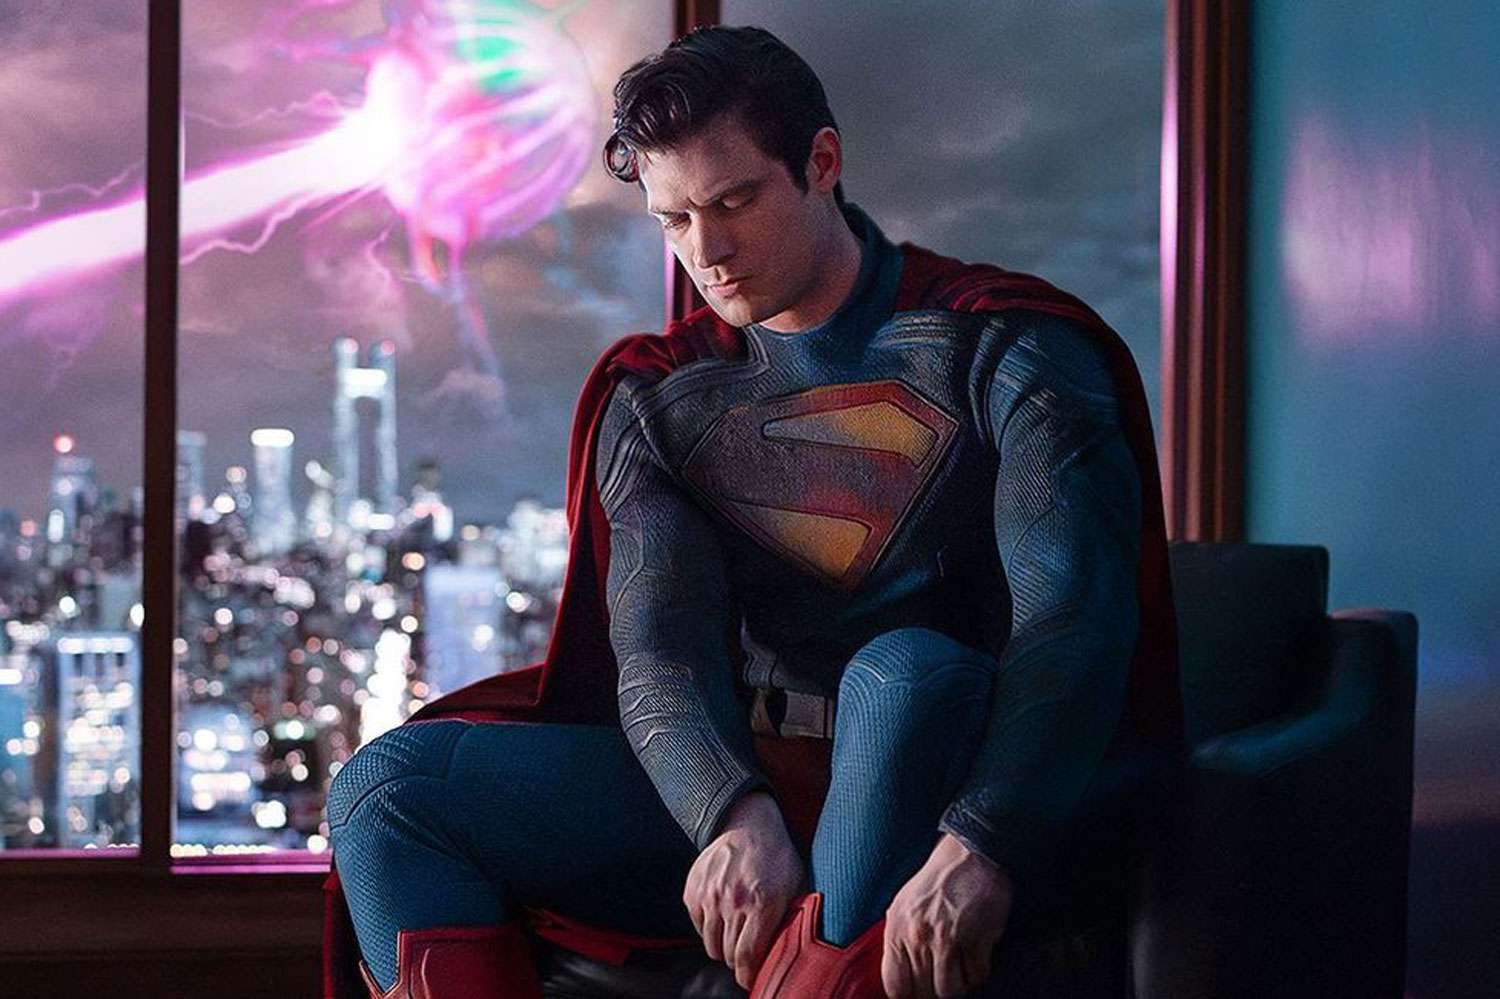 “Superman” First Look! David Corenswet Suits Up as Iconic Superhero in New Photo: 'Get Ready'